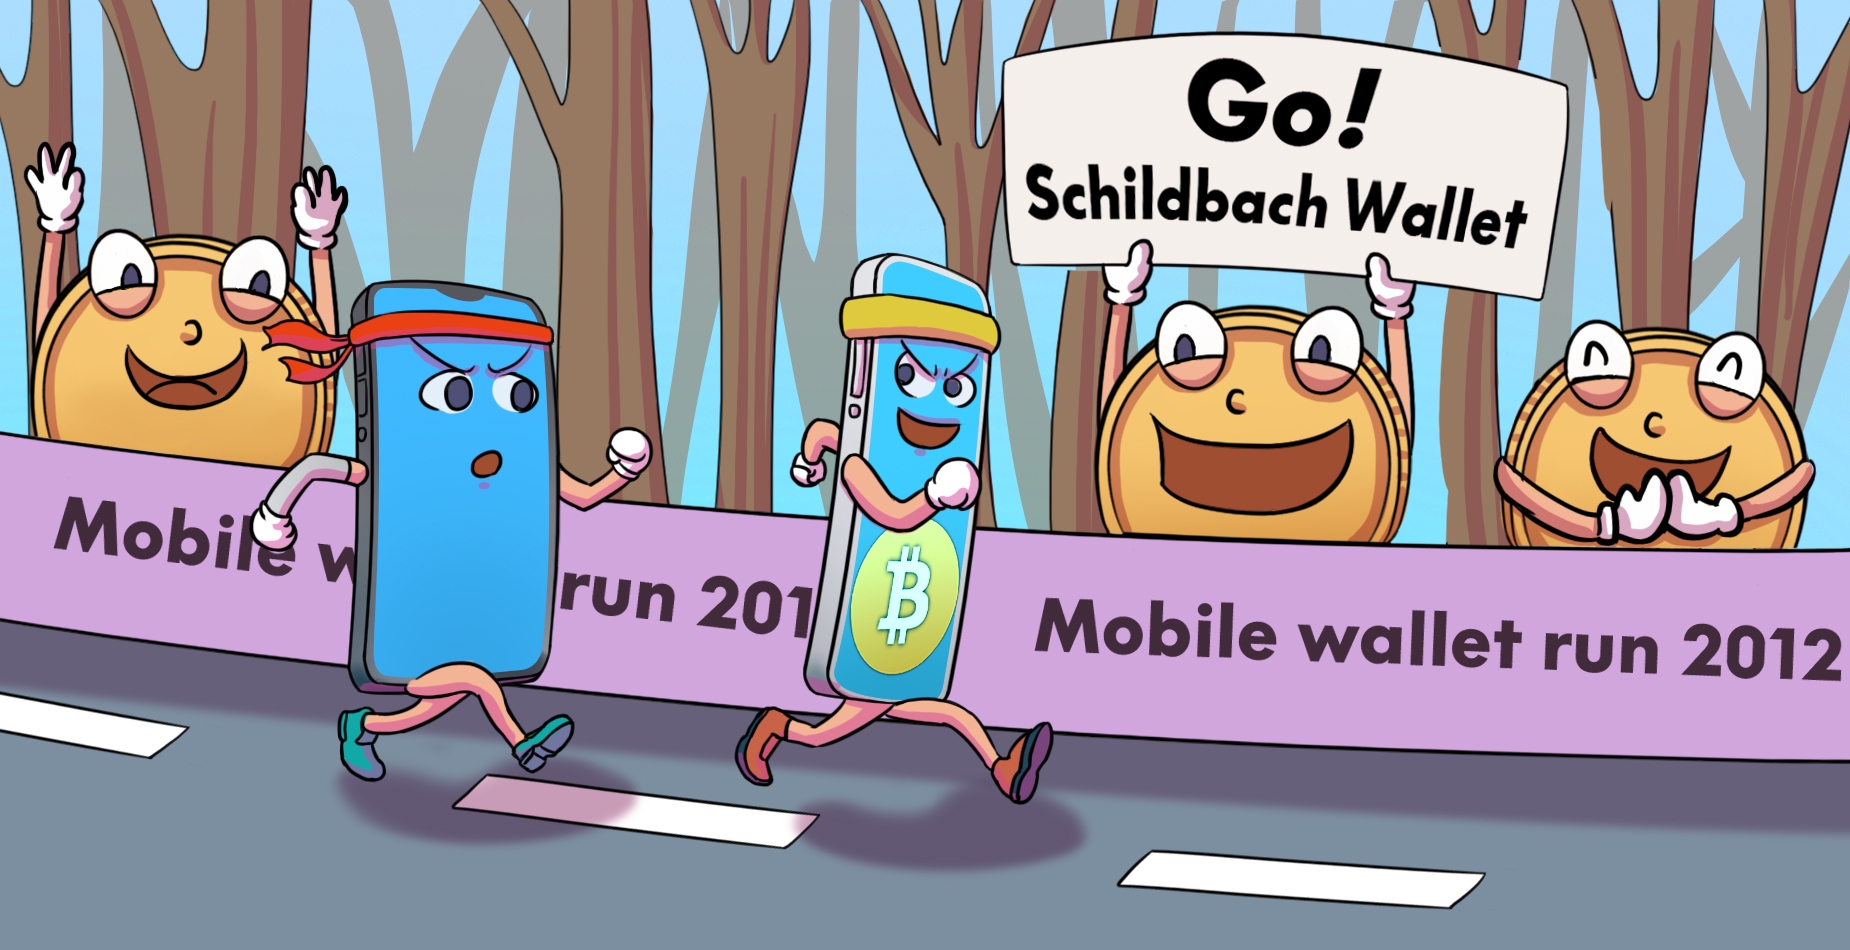 Smartphones running a marathon while coins are cheering them on. The smartphone with the Schildbach Logo is in 1st place.